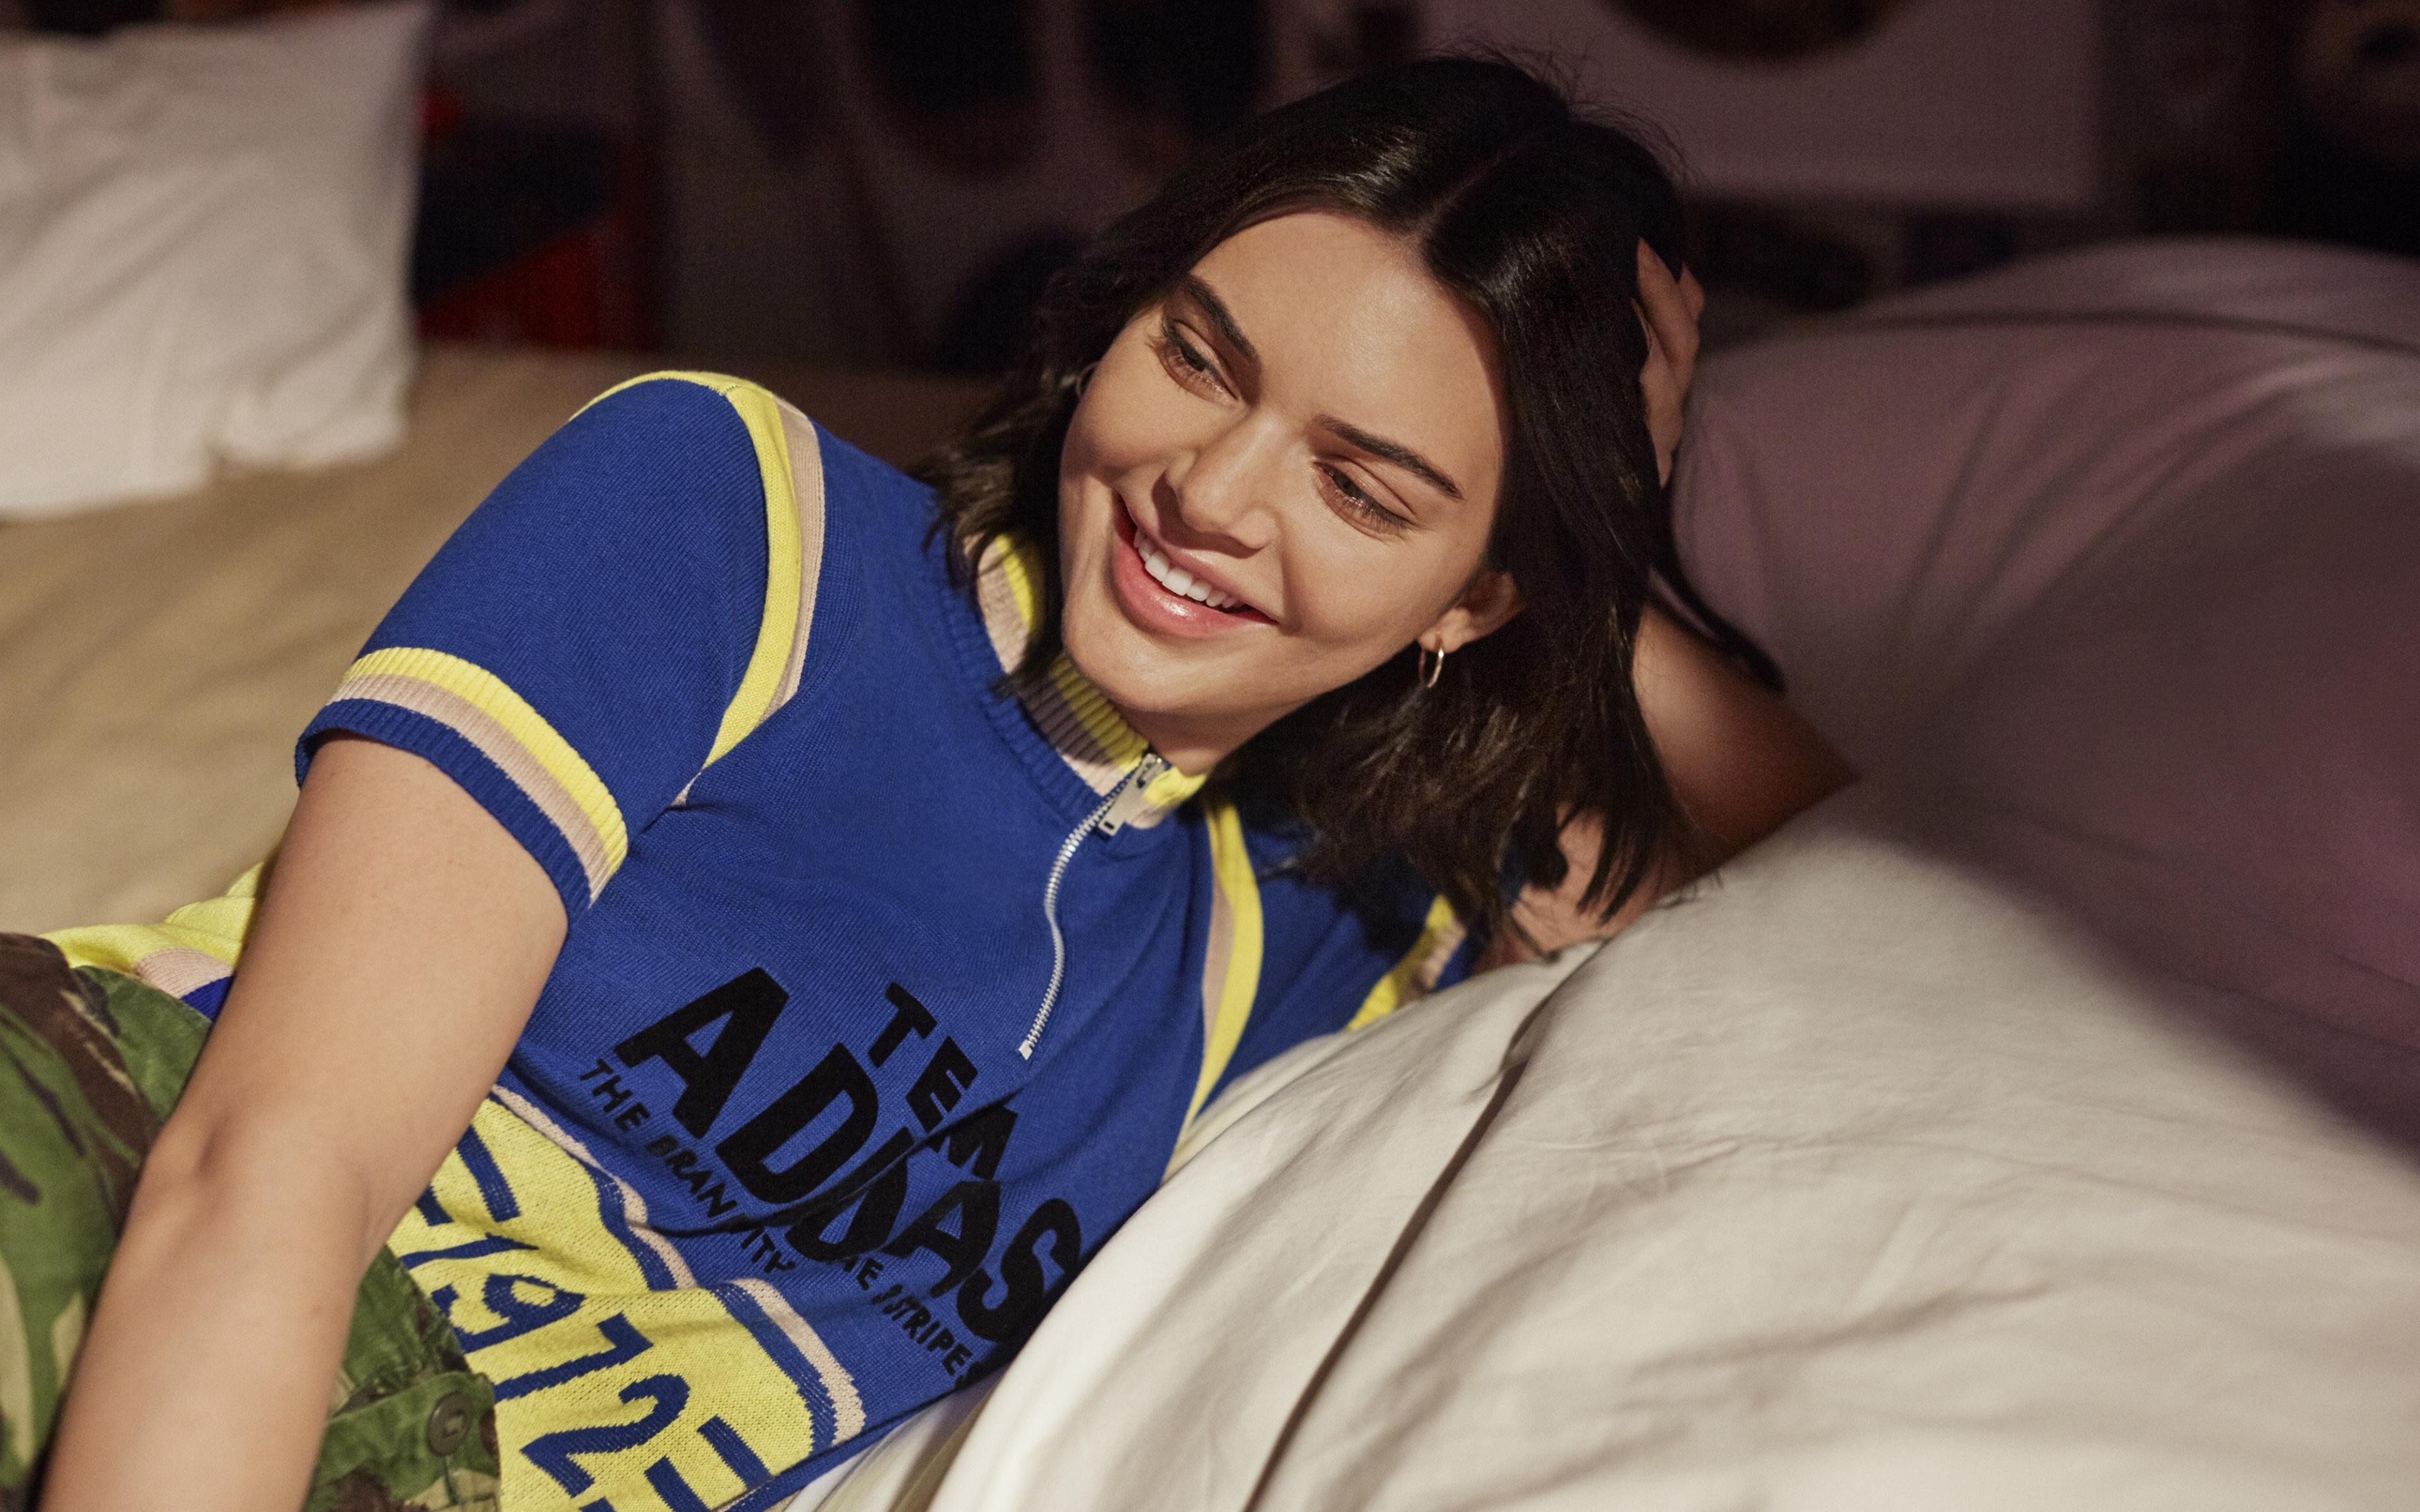 Download 3840x2400 wallpaper kendall jenner, adidas campaign, smile